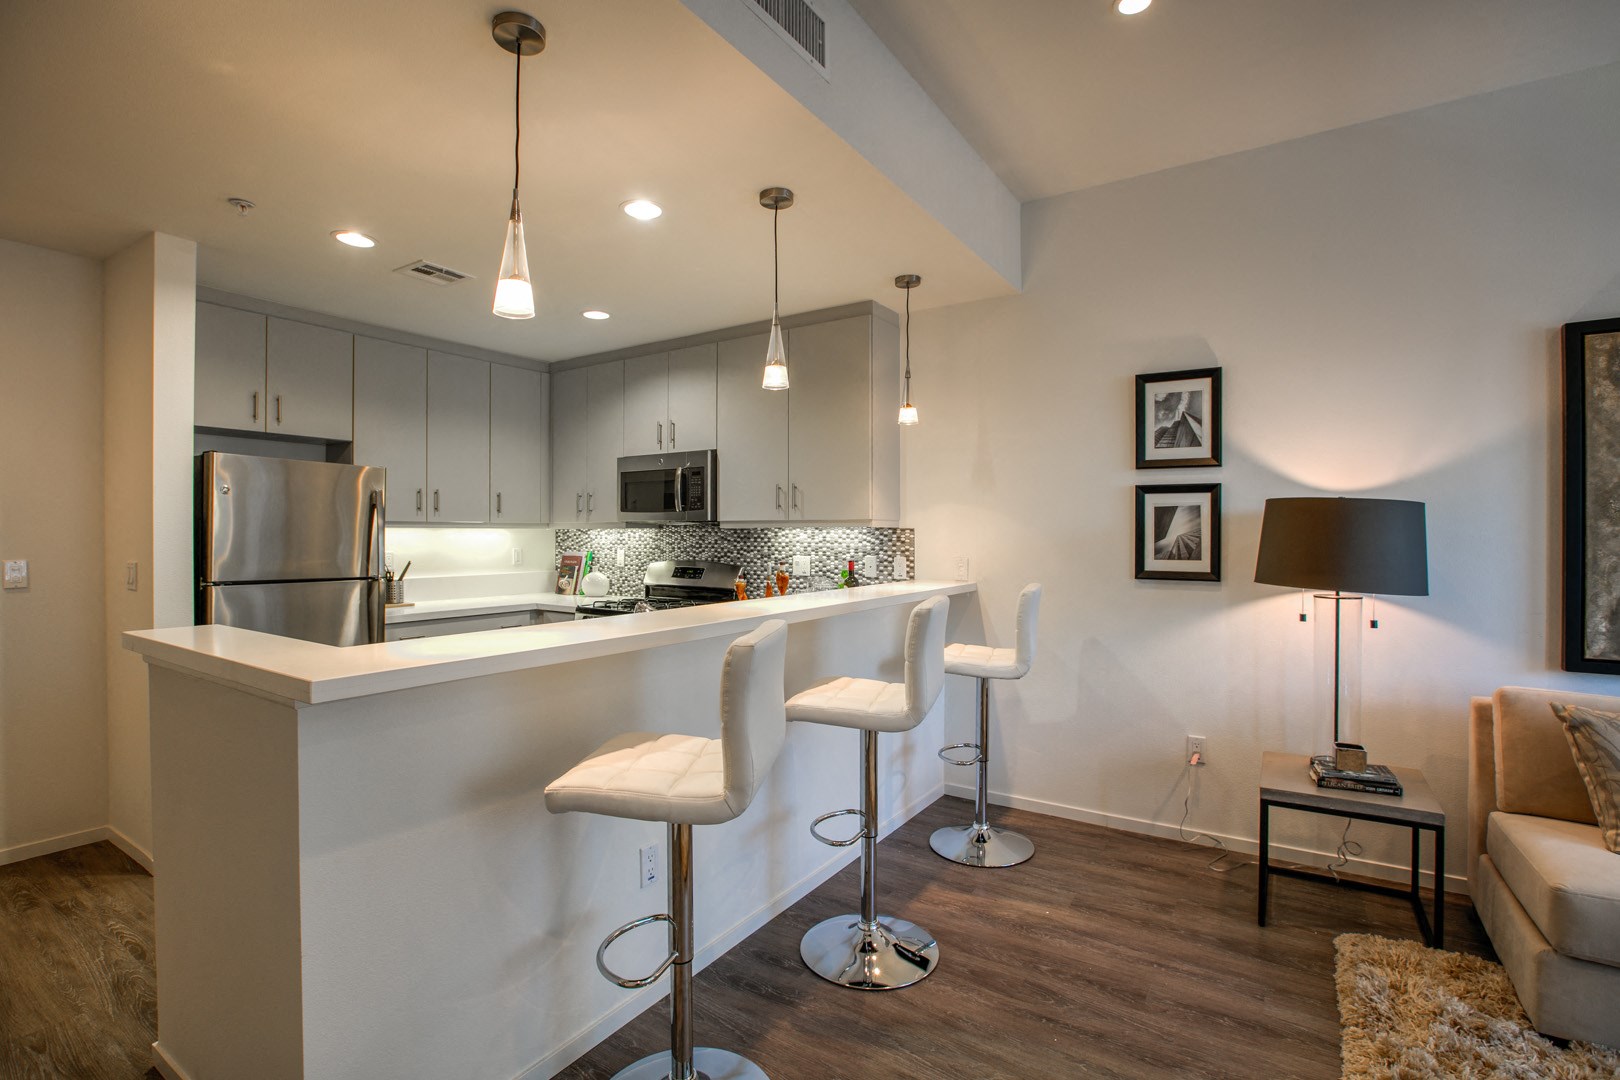 Modern Kitchen with Breakfast Bar, at Legendary Glendale Apartments, CA 91203